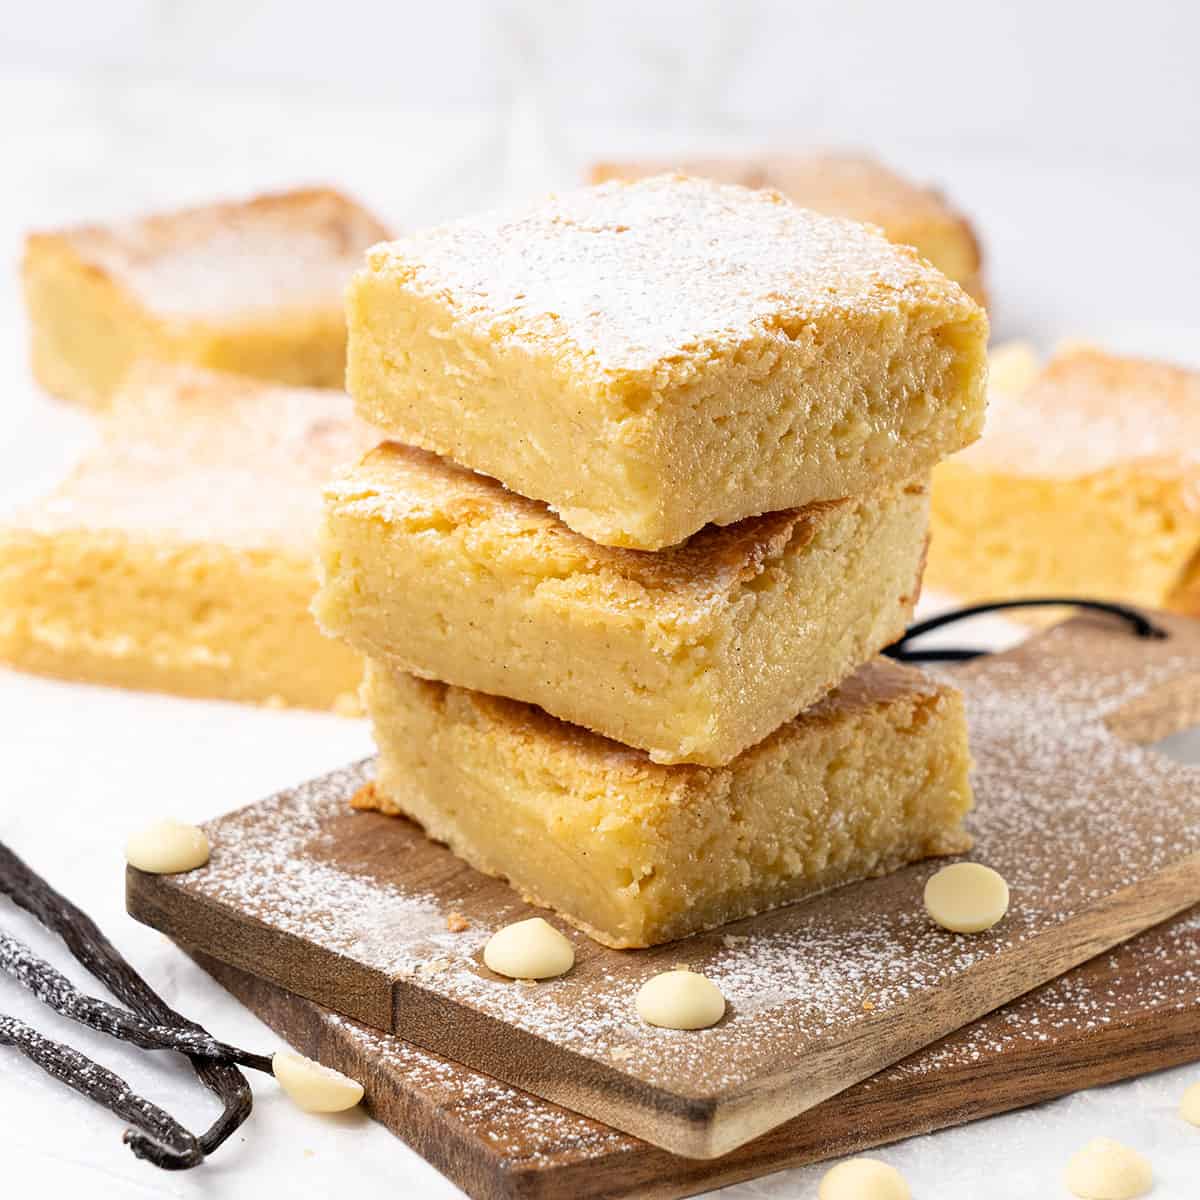 <p>These scrumptious <strong><a href="https://www.spatuladesserts.com/white-chocolate-brownies/">white chocolate brownies</a></strong> elevate the classic brownie to an entirely new level of heavenly yumminess by blending rich, creamy white chocolate into a perfectly soft and fudgy baked good! Whether you’re a lover of white chocolate or looking to try a new twist on traditional brownies, this decadent sweet treat is easy to make and sure to leave you craving more!</p><p><strong>Go to the recipe: <a href="https://www.spatuladesserts.com/white-chocolate-brownies/">White Chocolate Brownies</a></strong></p>